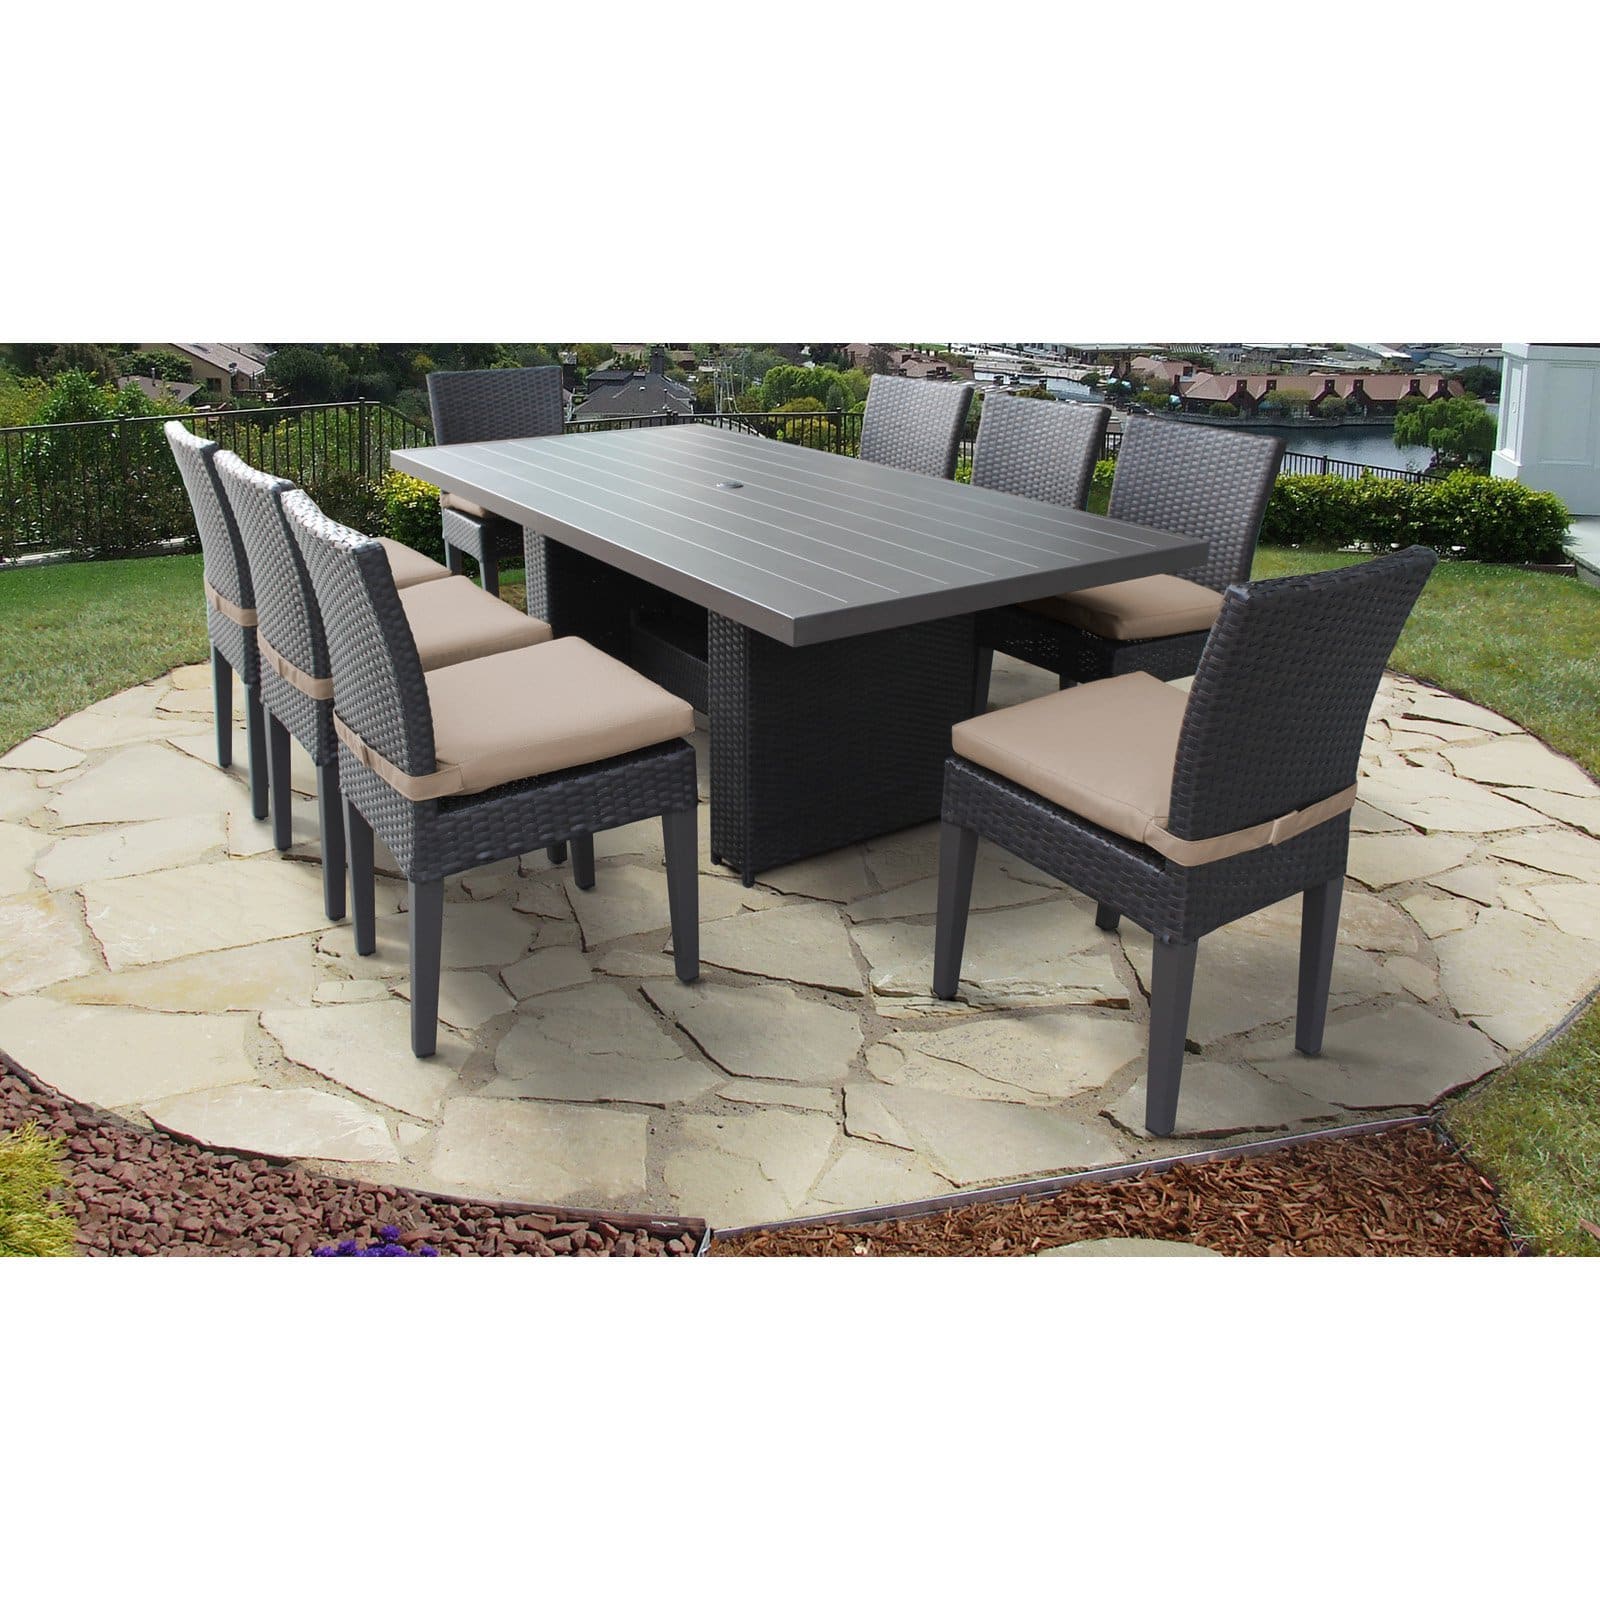 TK Classics Barbados Rectangular Outdoor Patio Dining Table with 8 Armless Chairs - image 2 of 2